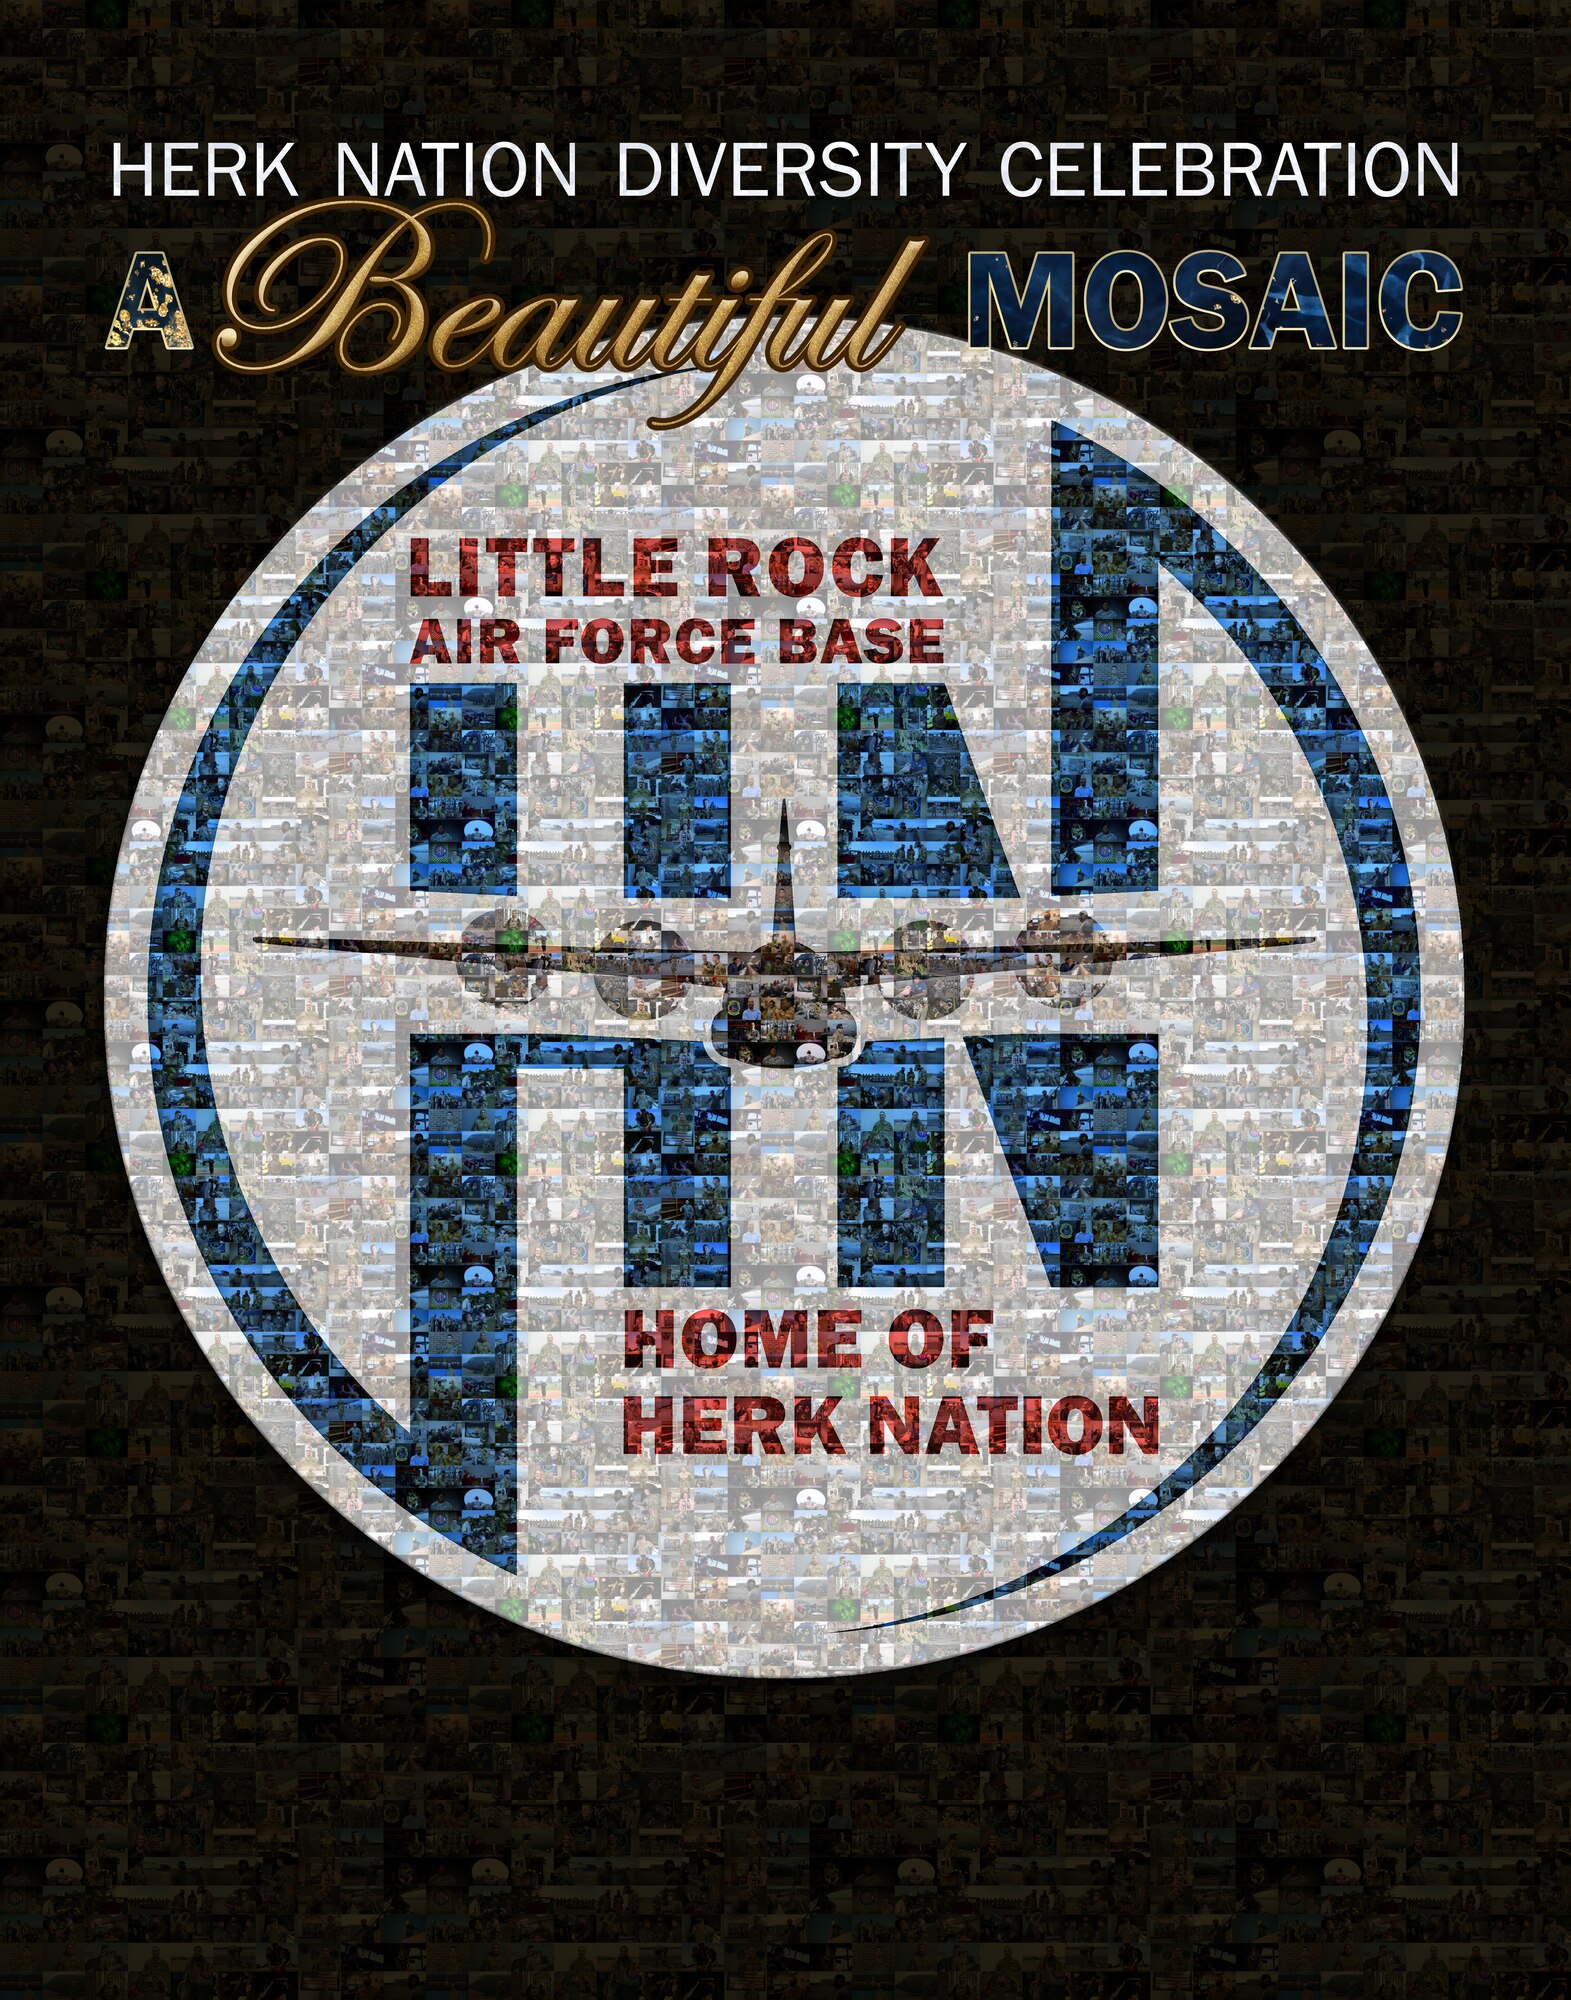 An image containing multiple images creates a mosaic of the Home of Herk Nation logo.